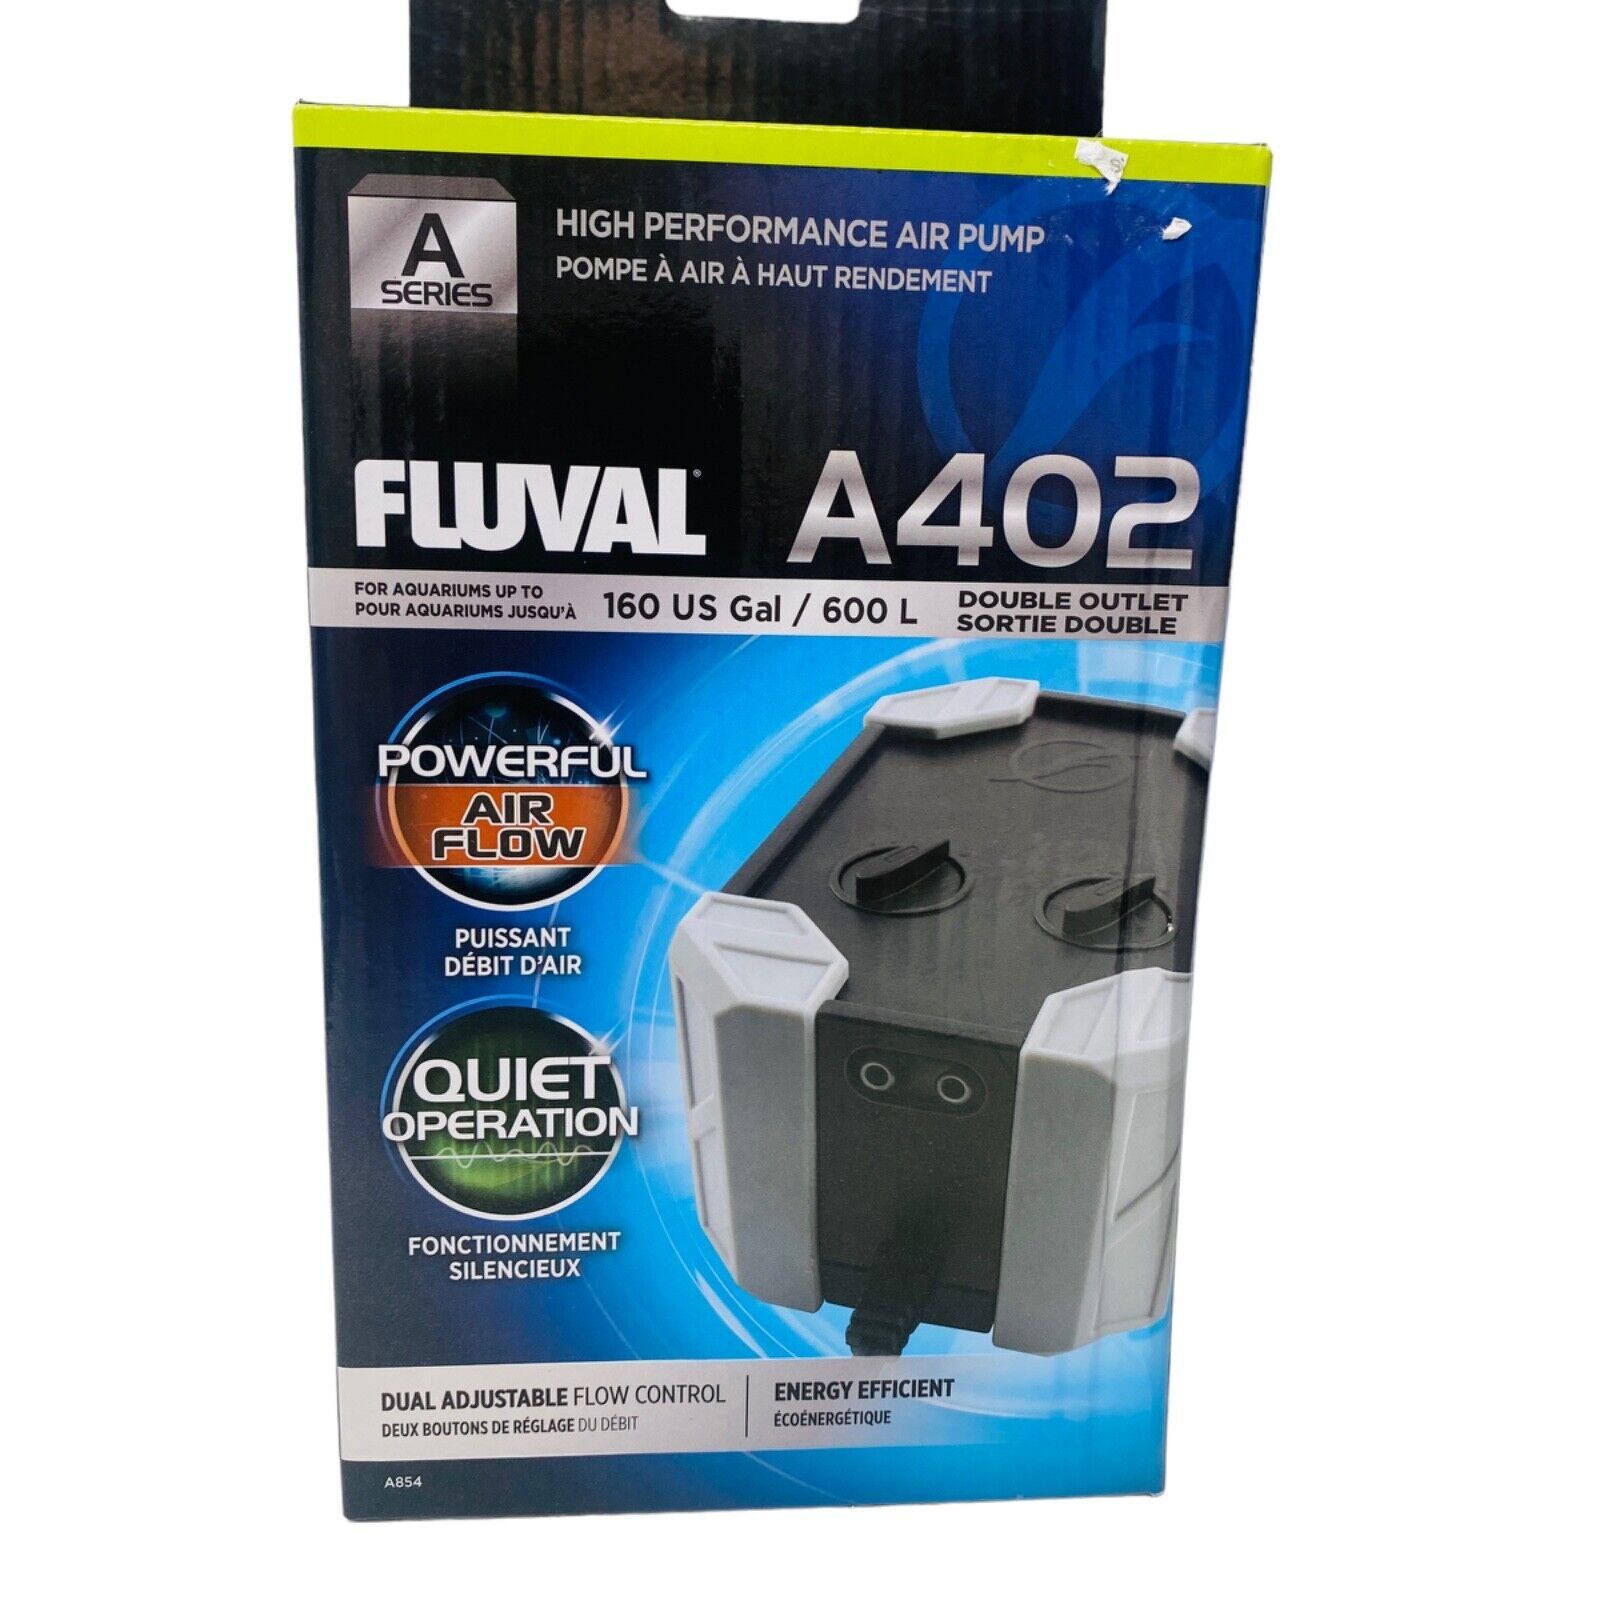 Primary image for A402 Air Pump (up to 160 US Gal) - Double Outlet Fluval for Aquariums